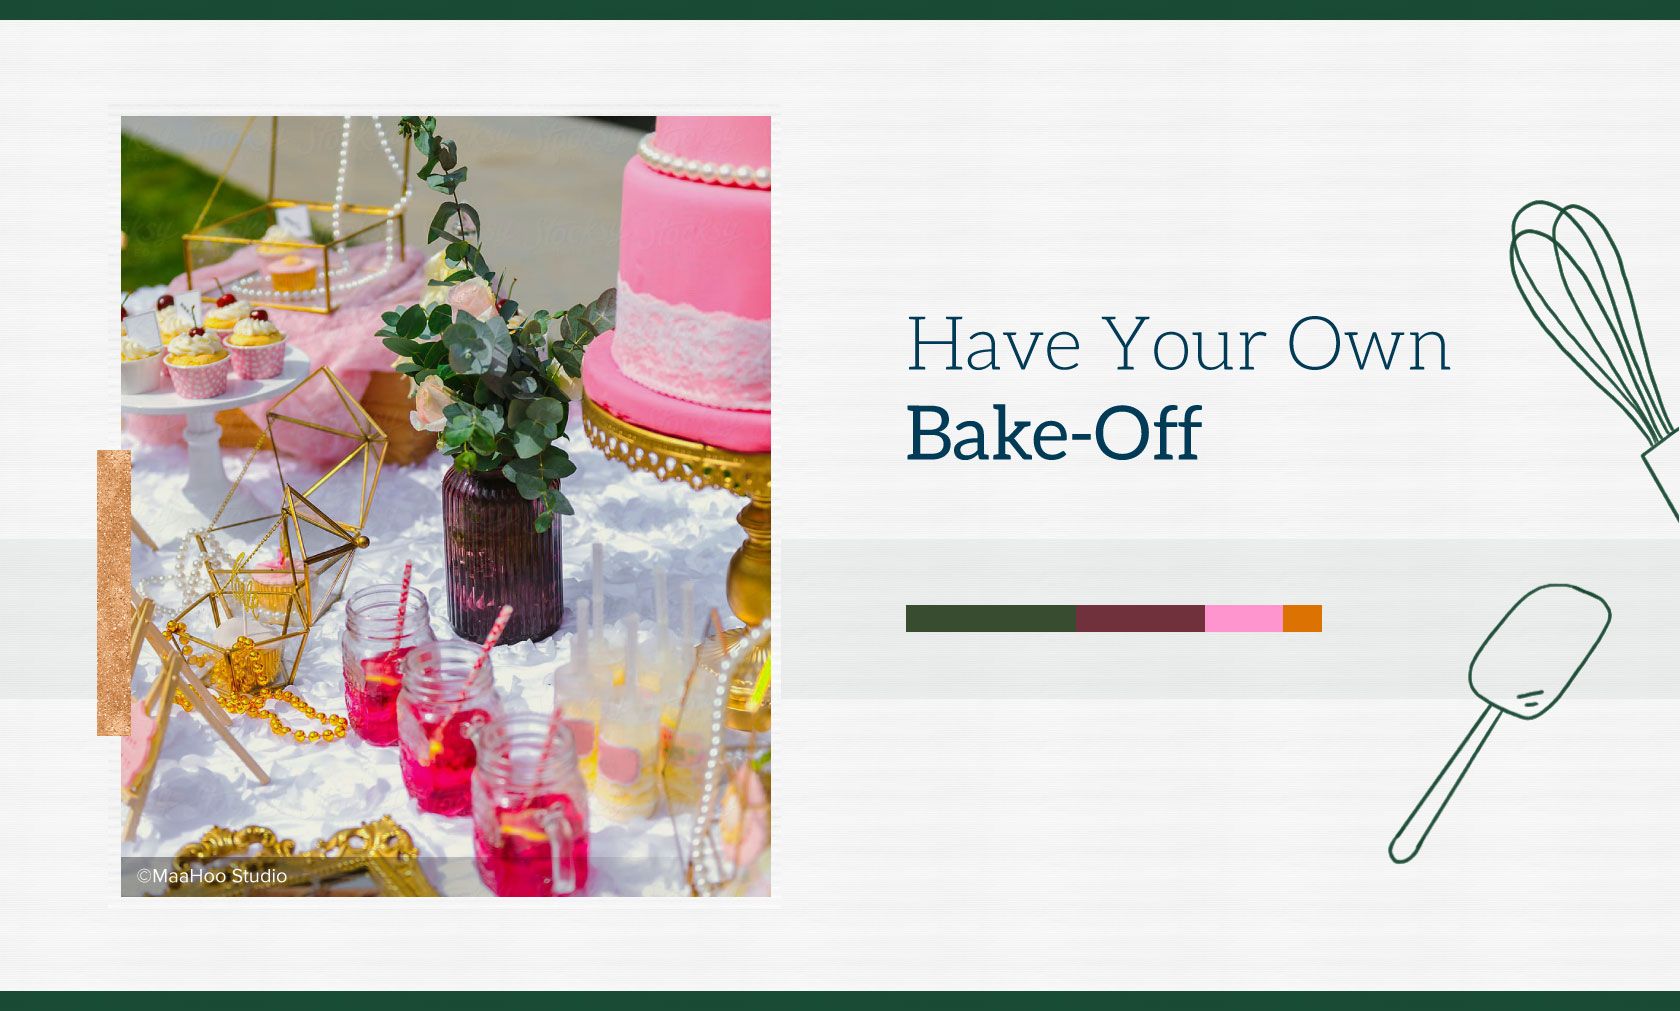 Have Your Own Bake-Off